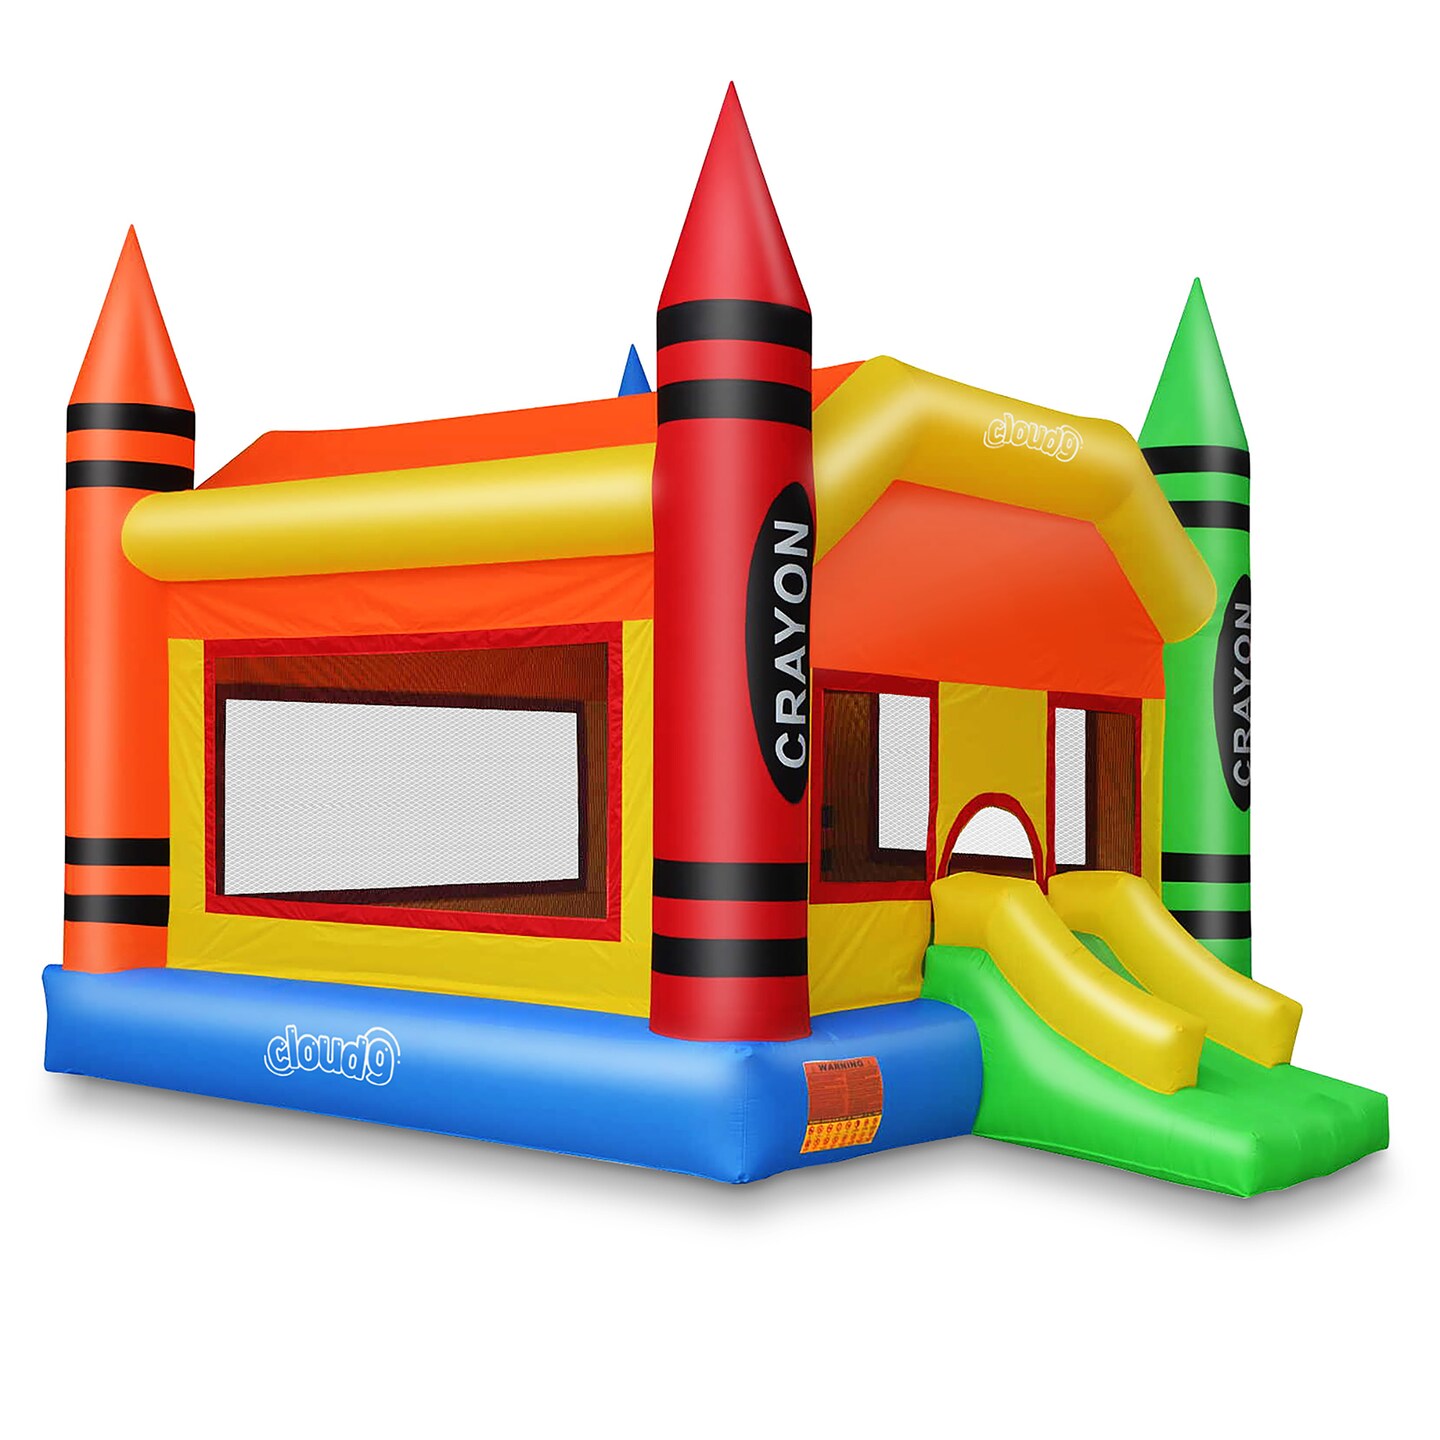 Cloud 9 Crayon Bounce House with Blower - Large Inflatable Bouncer for Kids with Slide